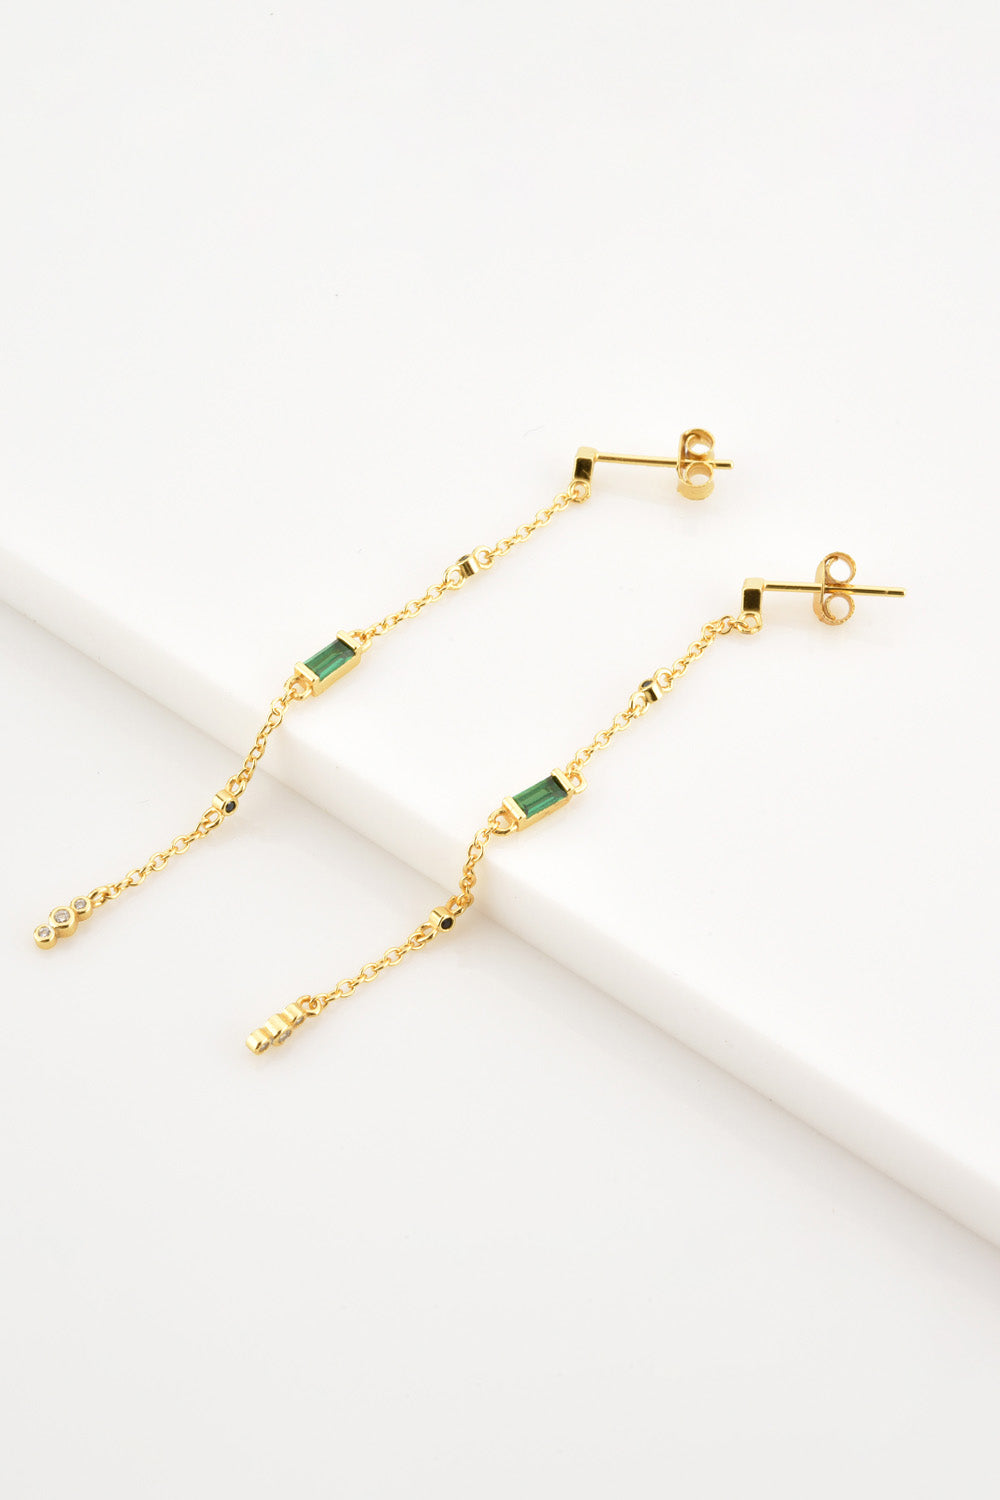 Elevate your style with our gold-plated earrings, a symbol of timeless elegance and sophistication.